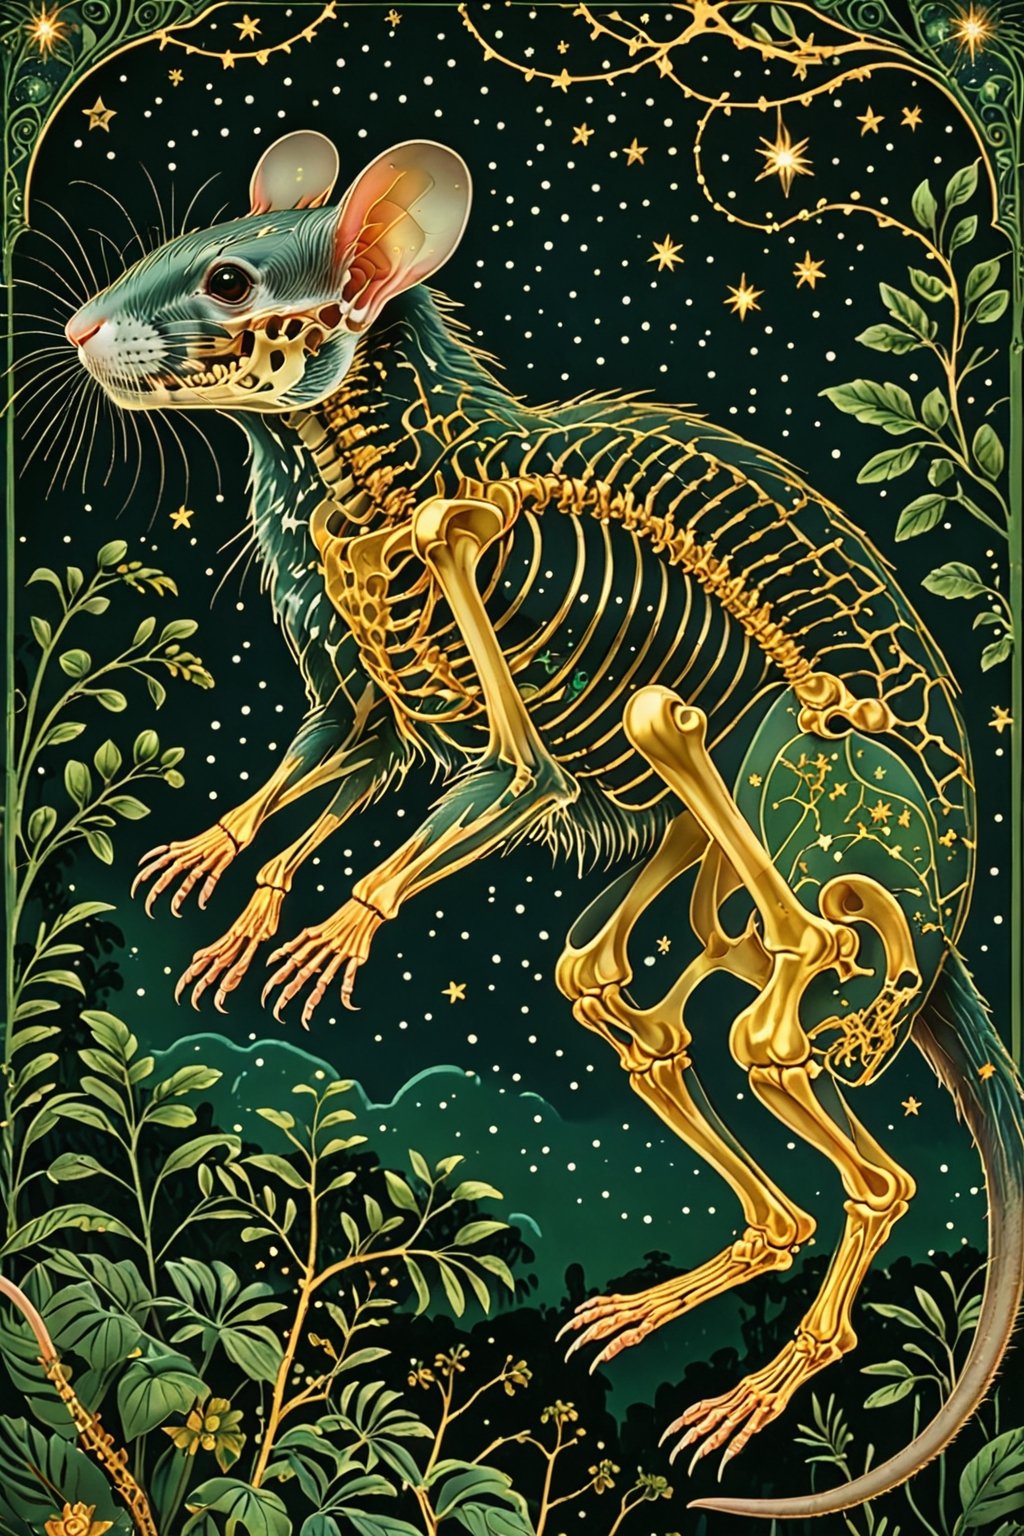 A majestic rat with intricate gold metal patterns adorning his skeletal structure. Jumping in the air, attacking with bared fangs, in the jungle backdrop, surrounded by stars and constellations, illustrations, beautiful. The color palette is dominated by dark blue, green, black and white, with the skeleton shining, being the most prominent feature, contrasting beautifully with the background elements.